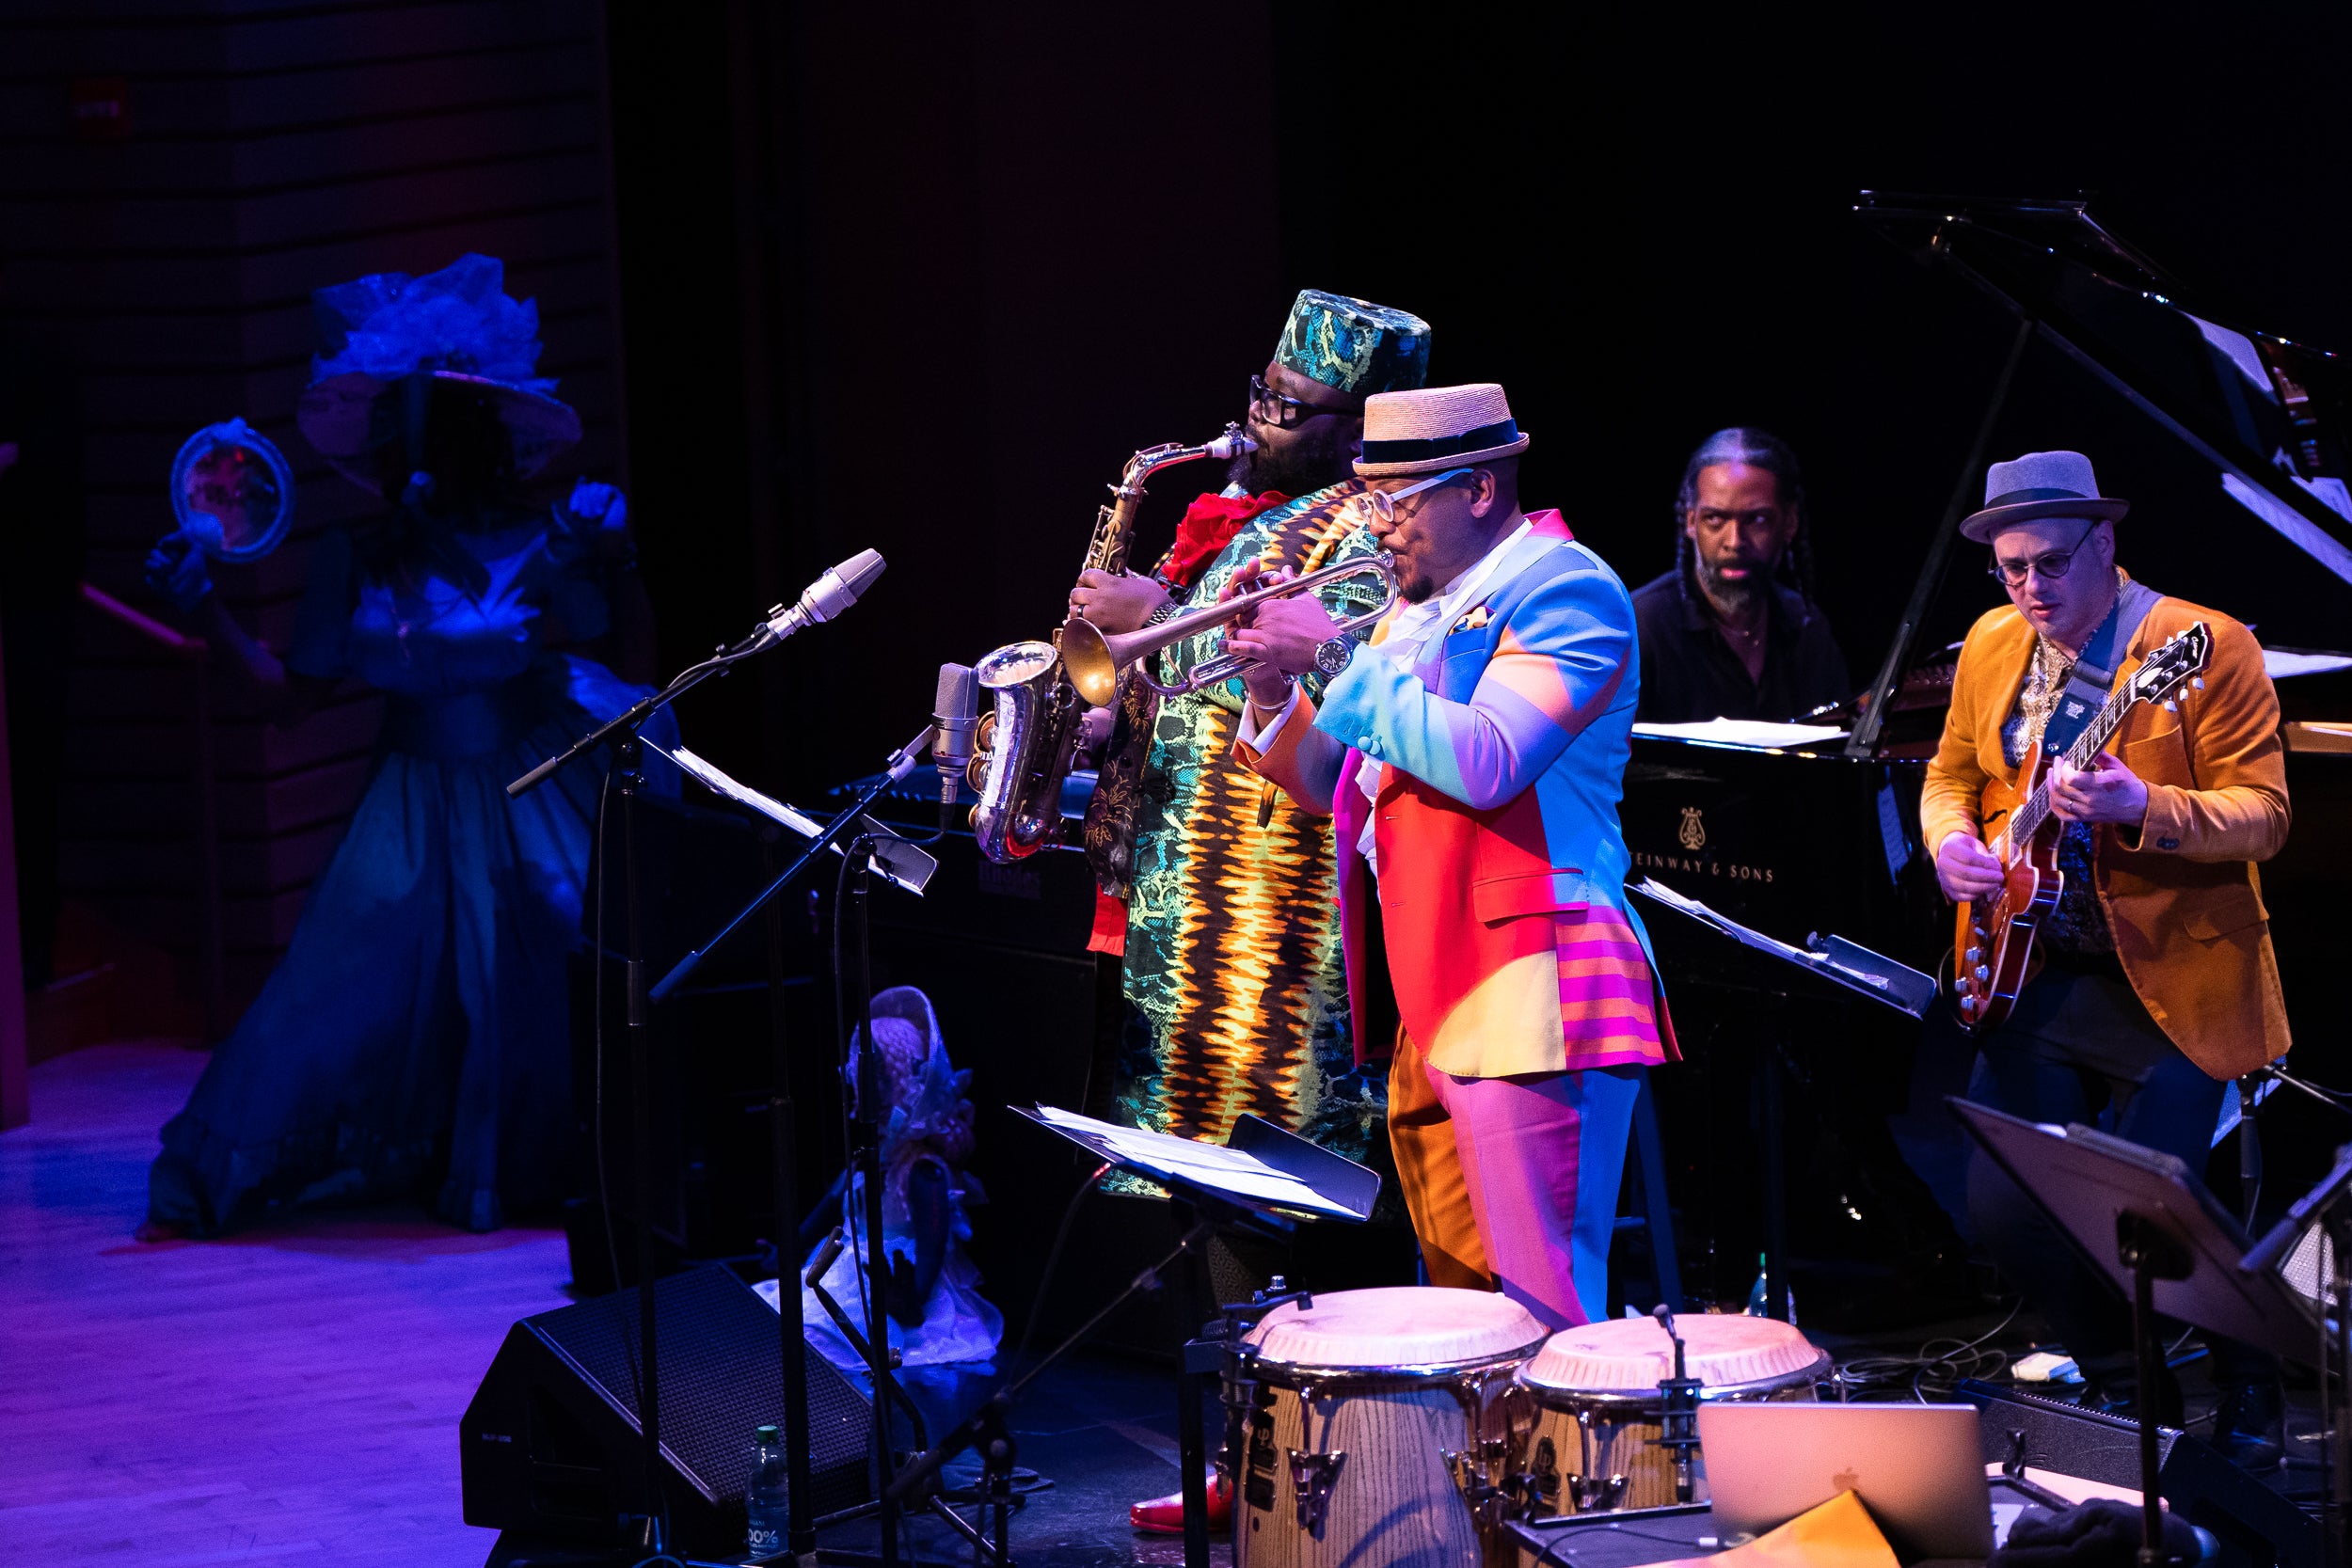 This Unique Concert Blending The Sounds Of Jazz And Vibe Of Carnival Is A Must-See